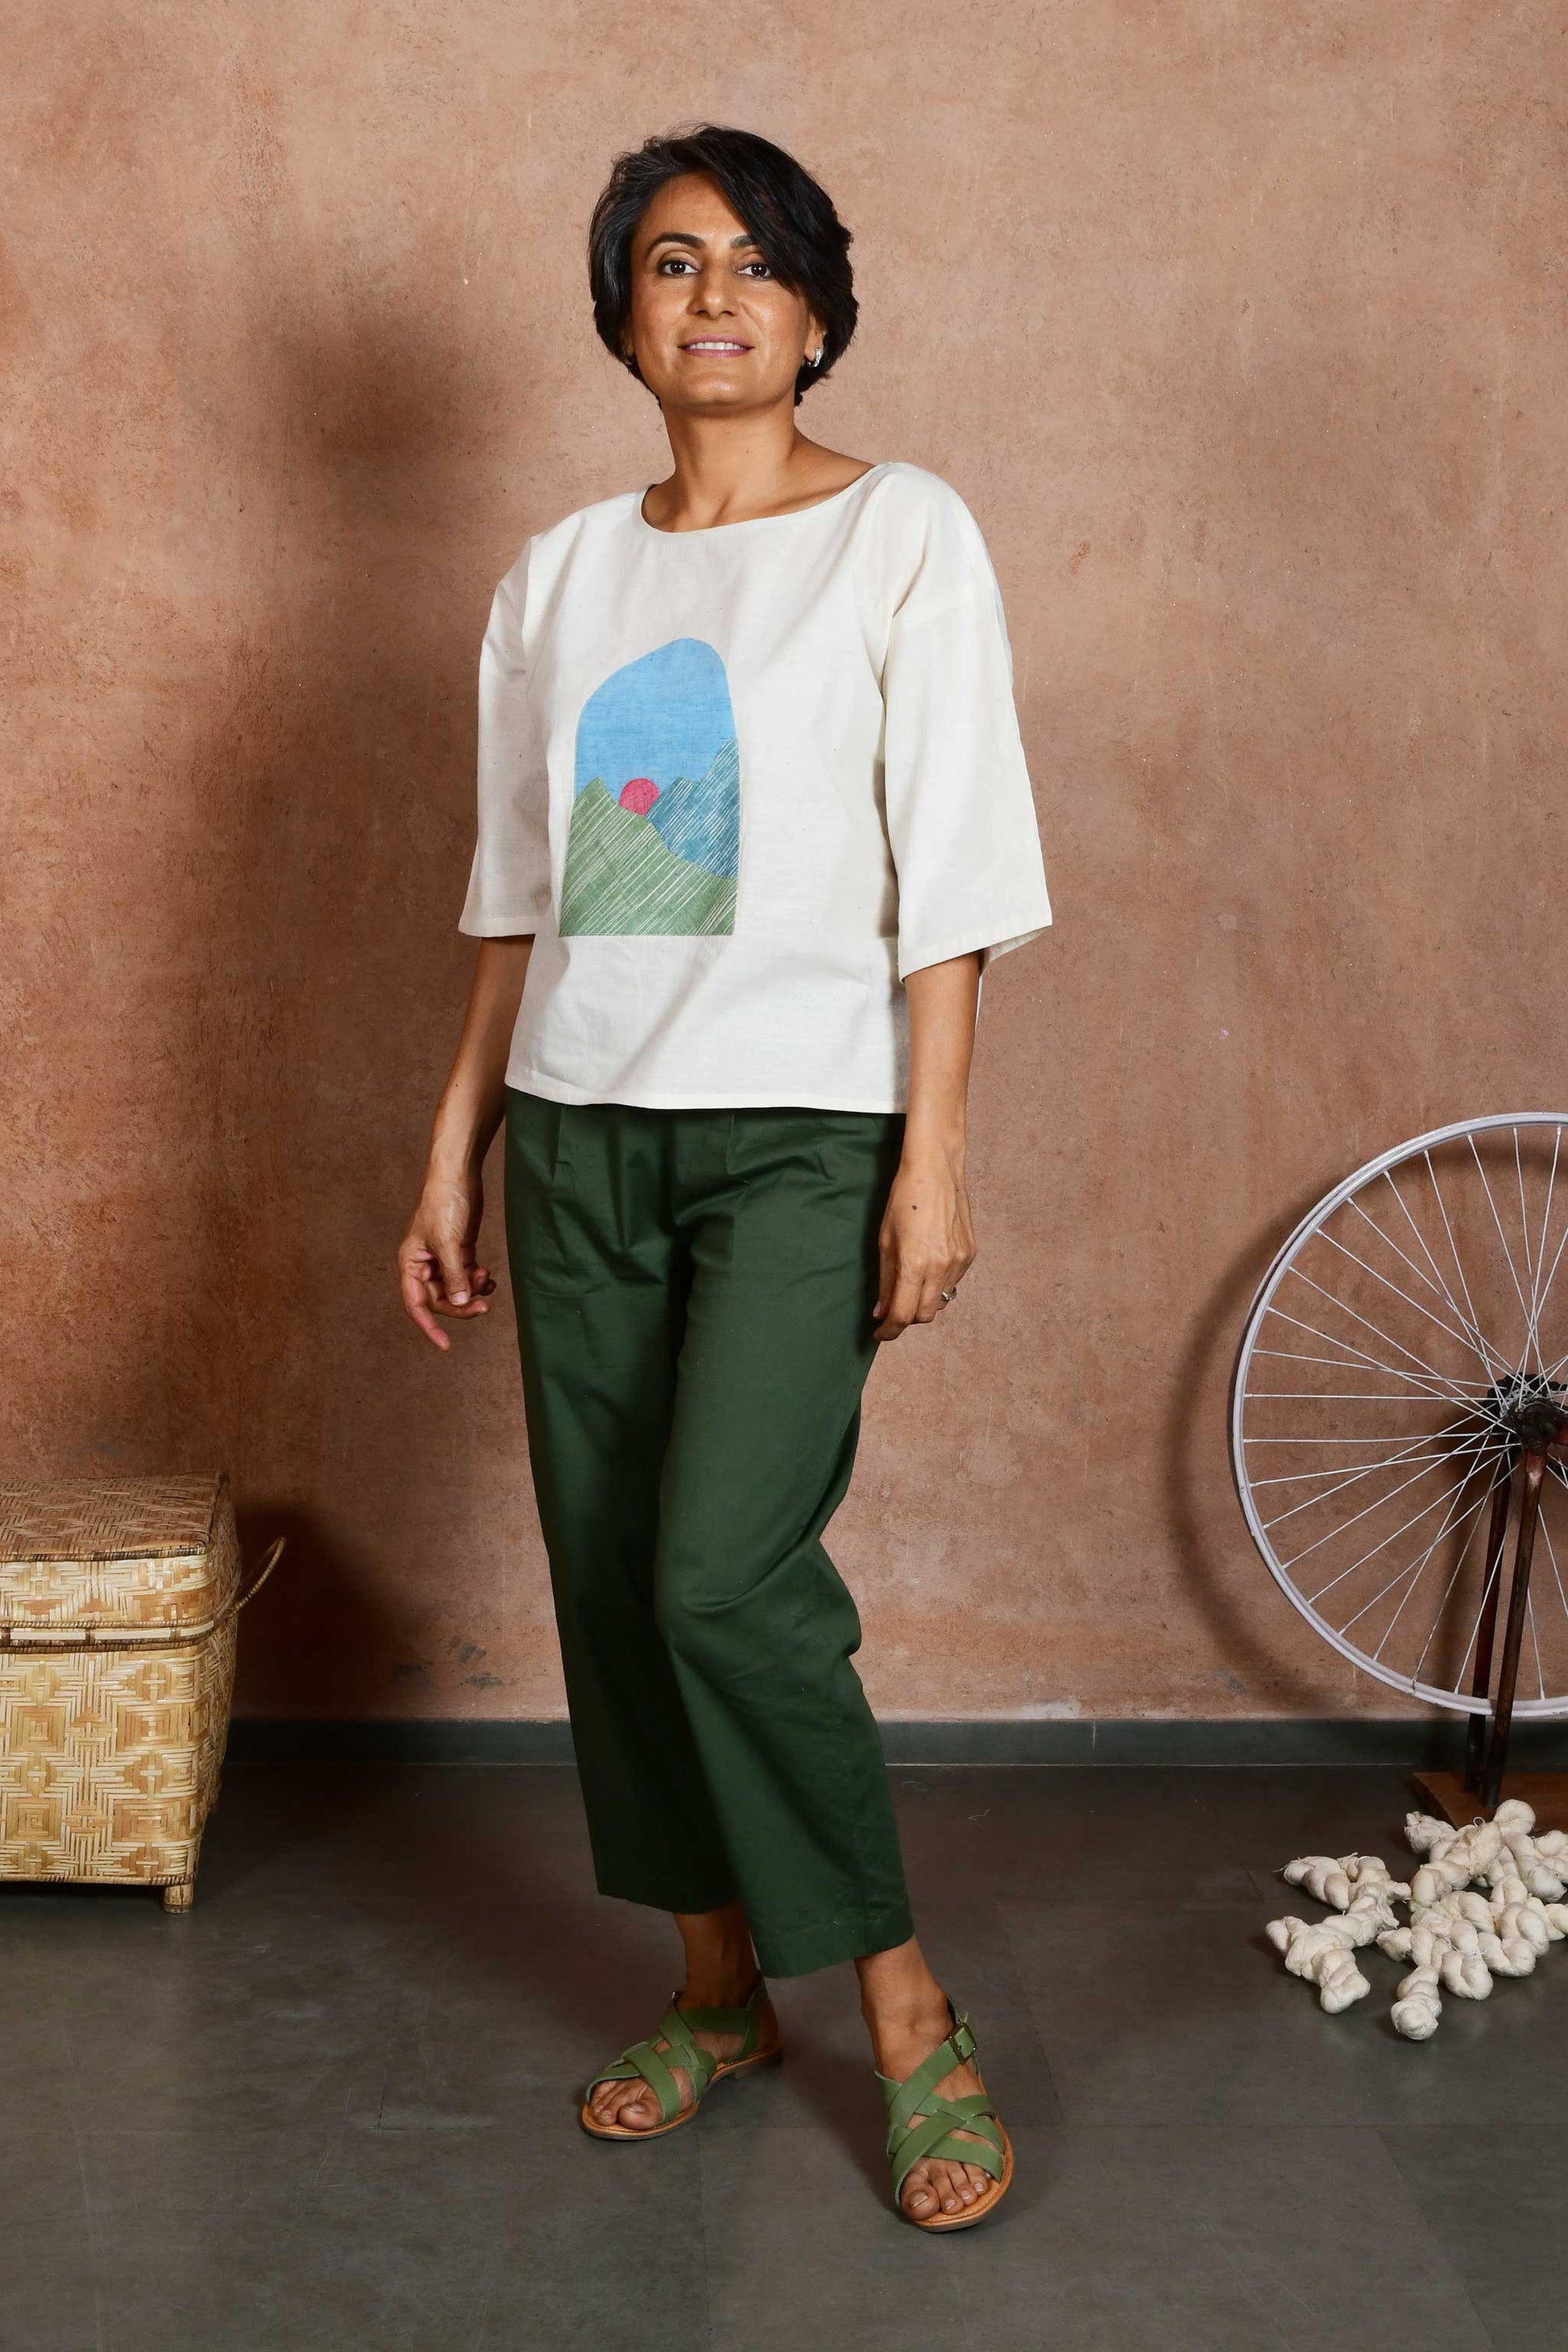 Front three quarters pose of a middle aged women wearing an off white oversized crop top blouse with an applique patch depicting a sunrise and green mountains paired with green capri pants.